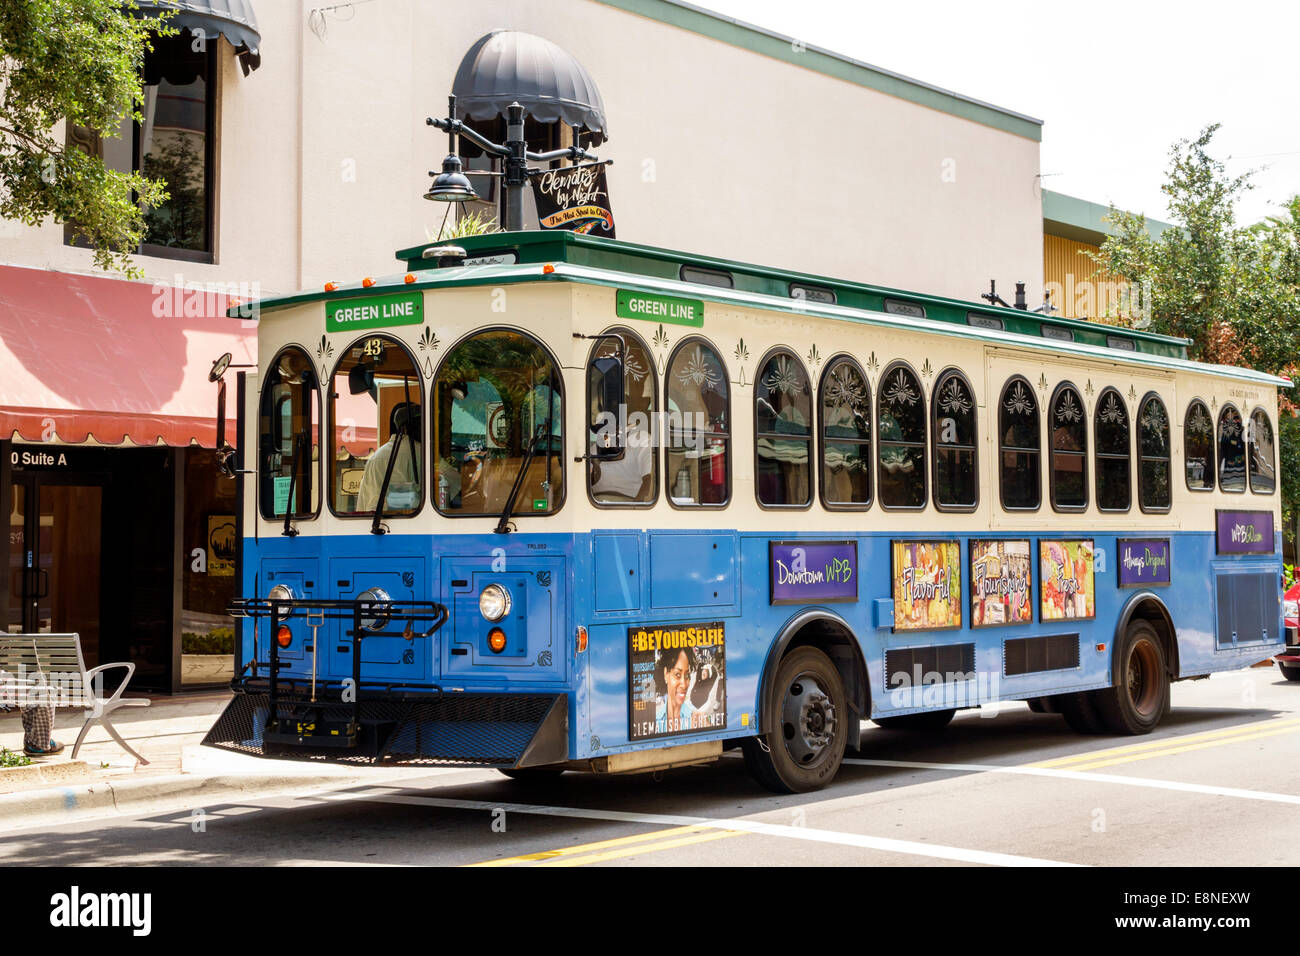 West Palm Beach Florida,Clematis Street,WPB Downtown Trolley,Green Line,FL140524030 Stock Photo